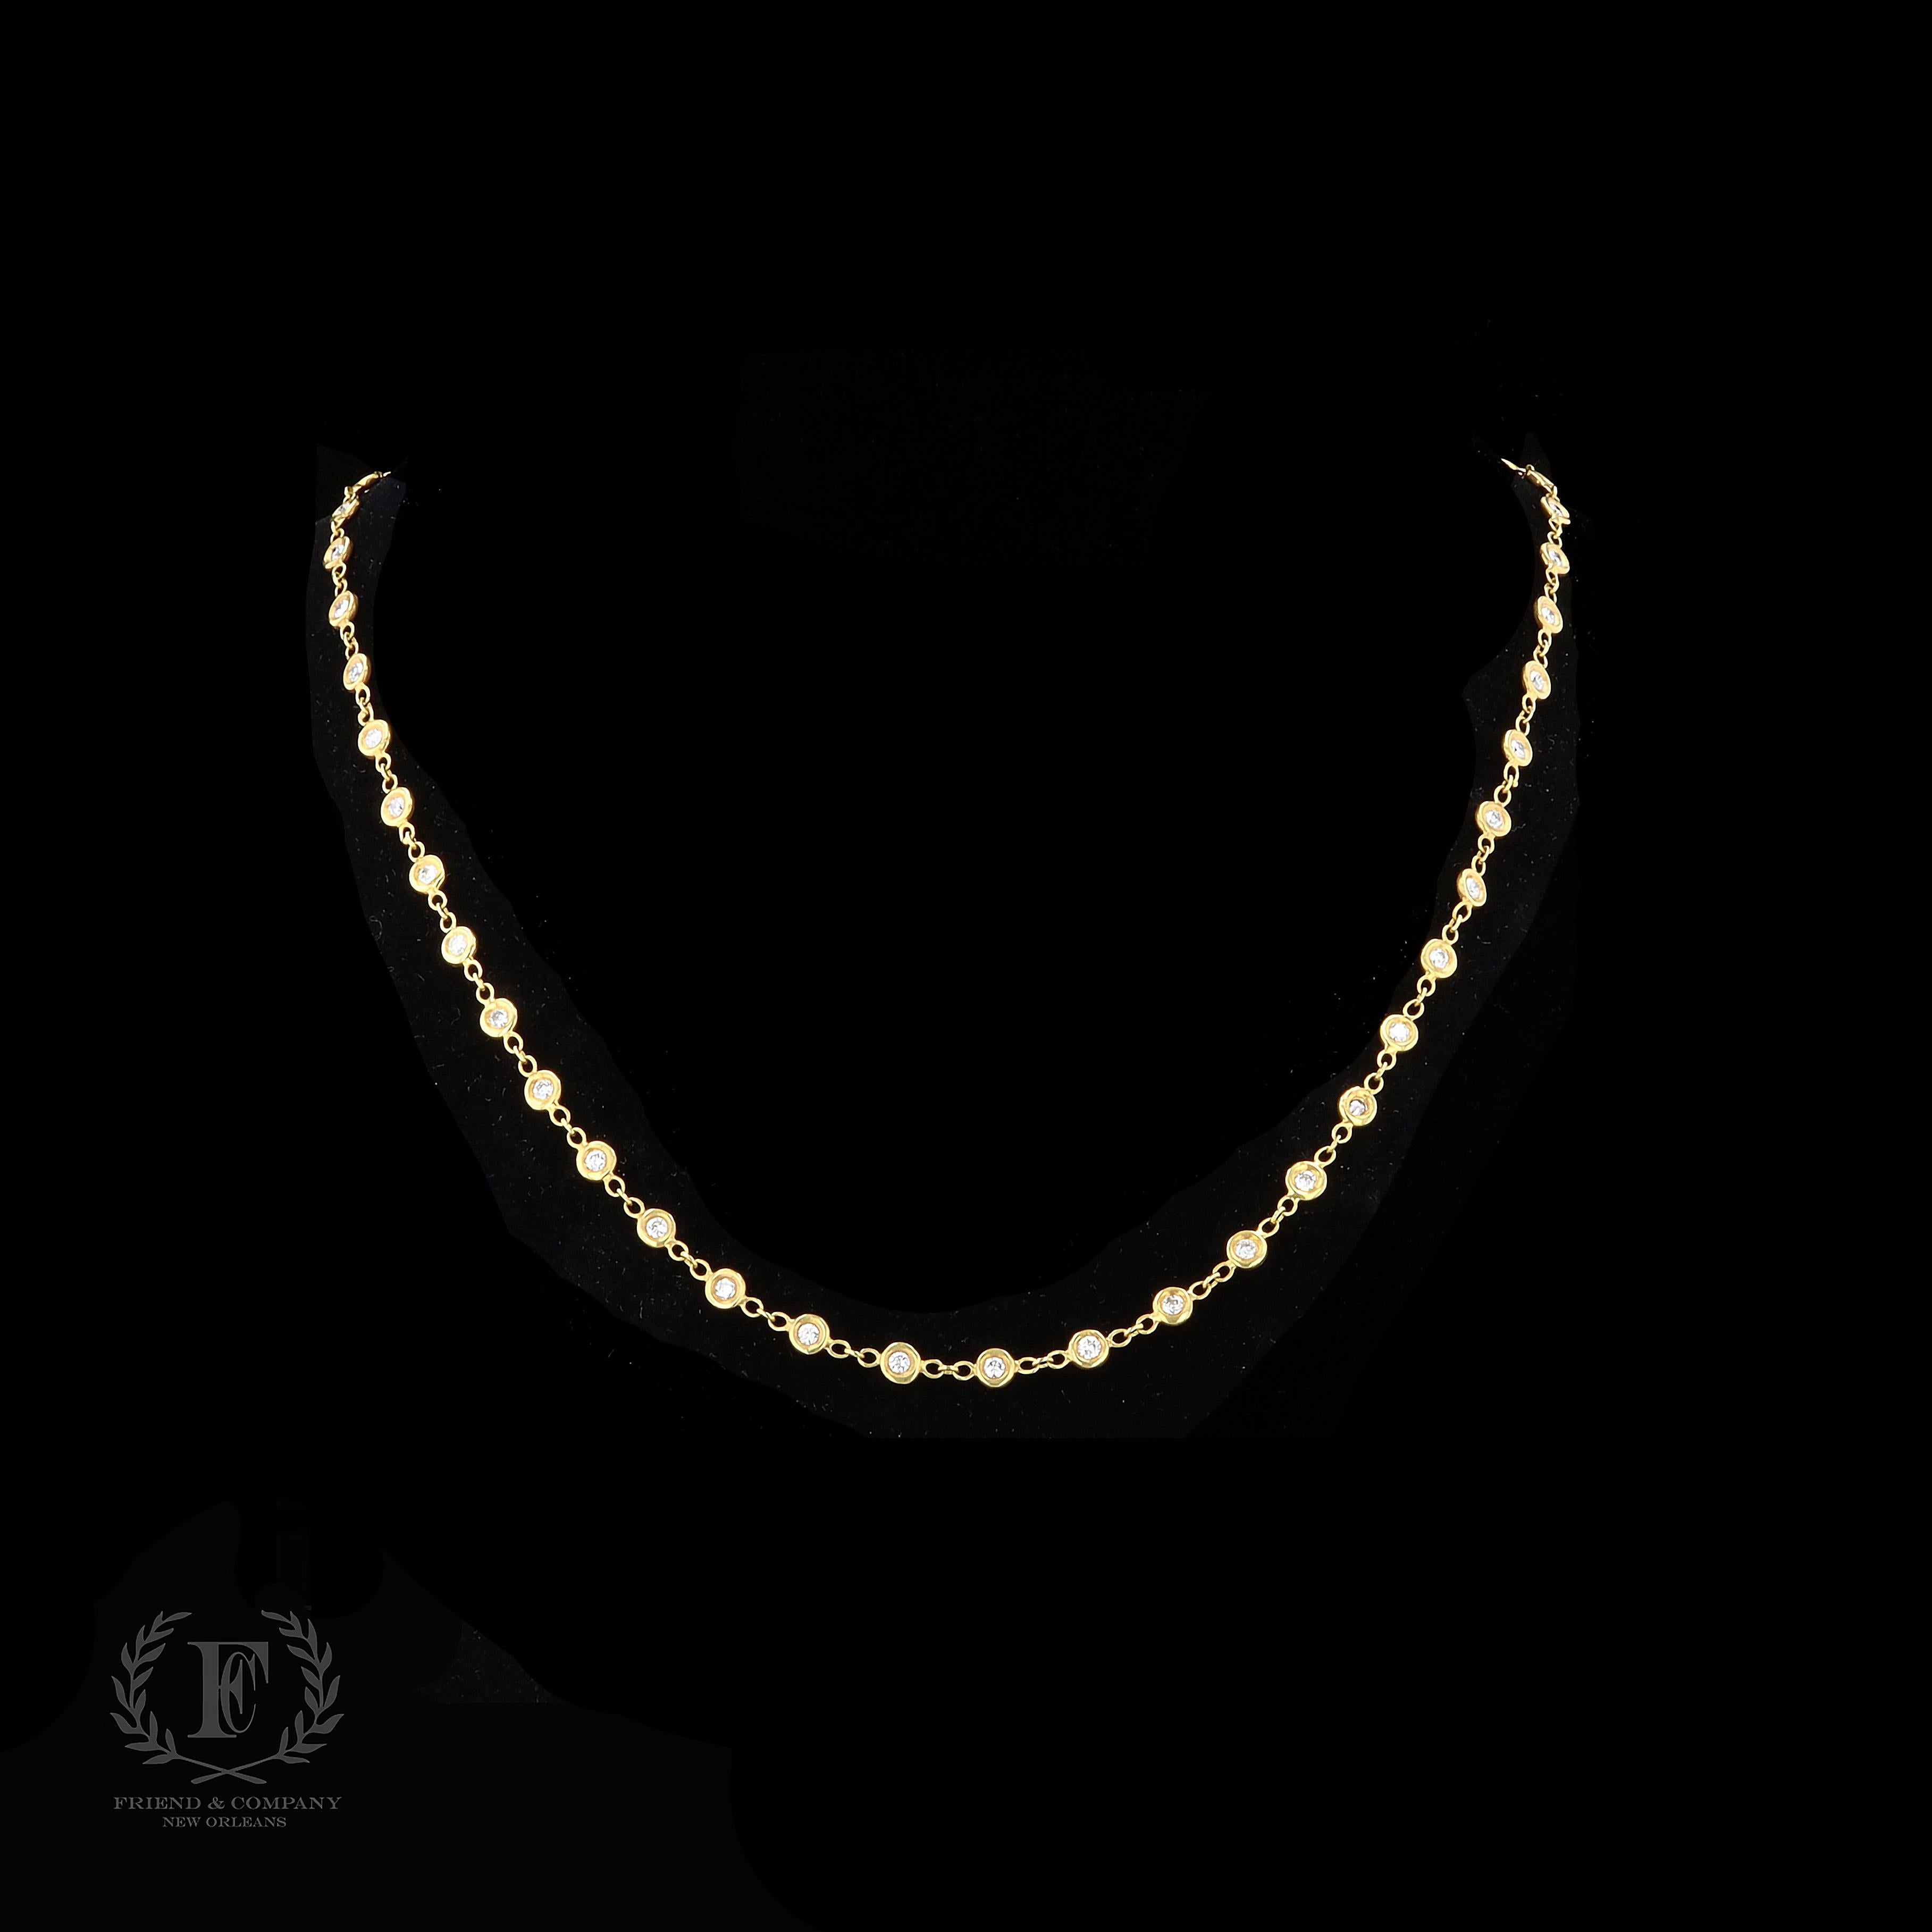 This dazzling diamond by the yard necklace is the perfect everyday jewelry piece to dress up or down. The necklace is set with round cut diamonds that weigh approximately 2.00 carats total. The color of the diamonds is G-H with SI clarity. The